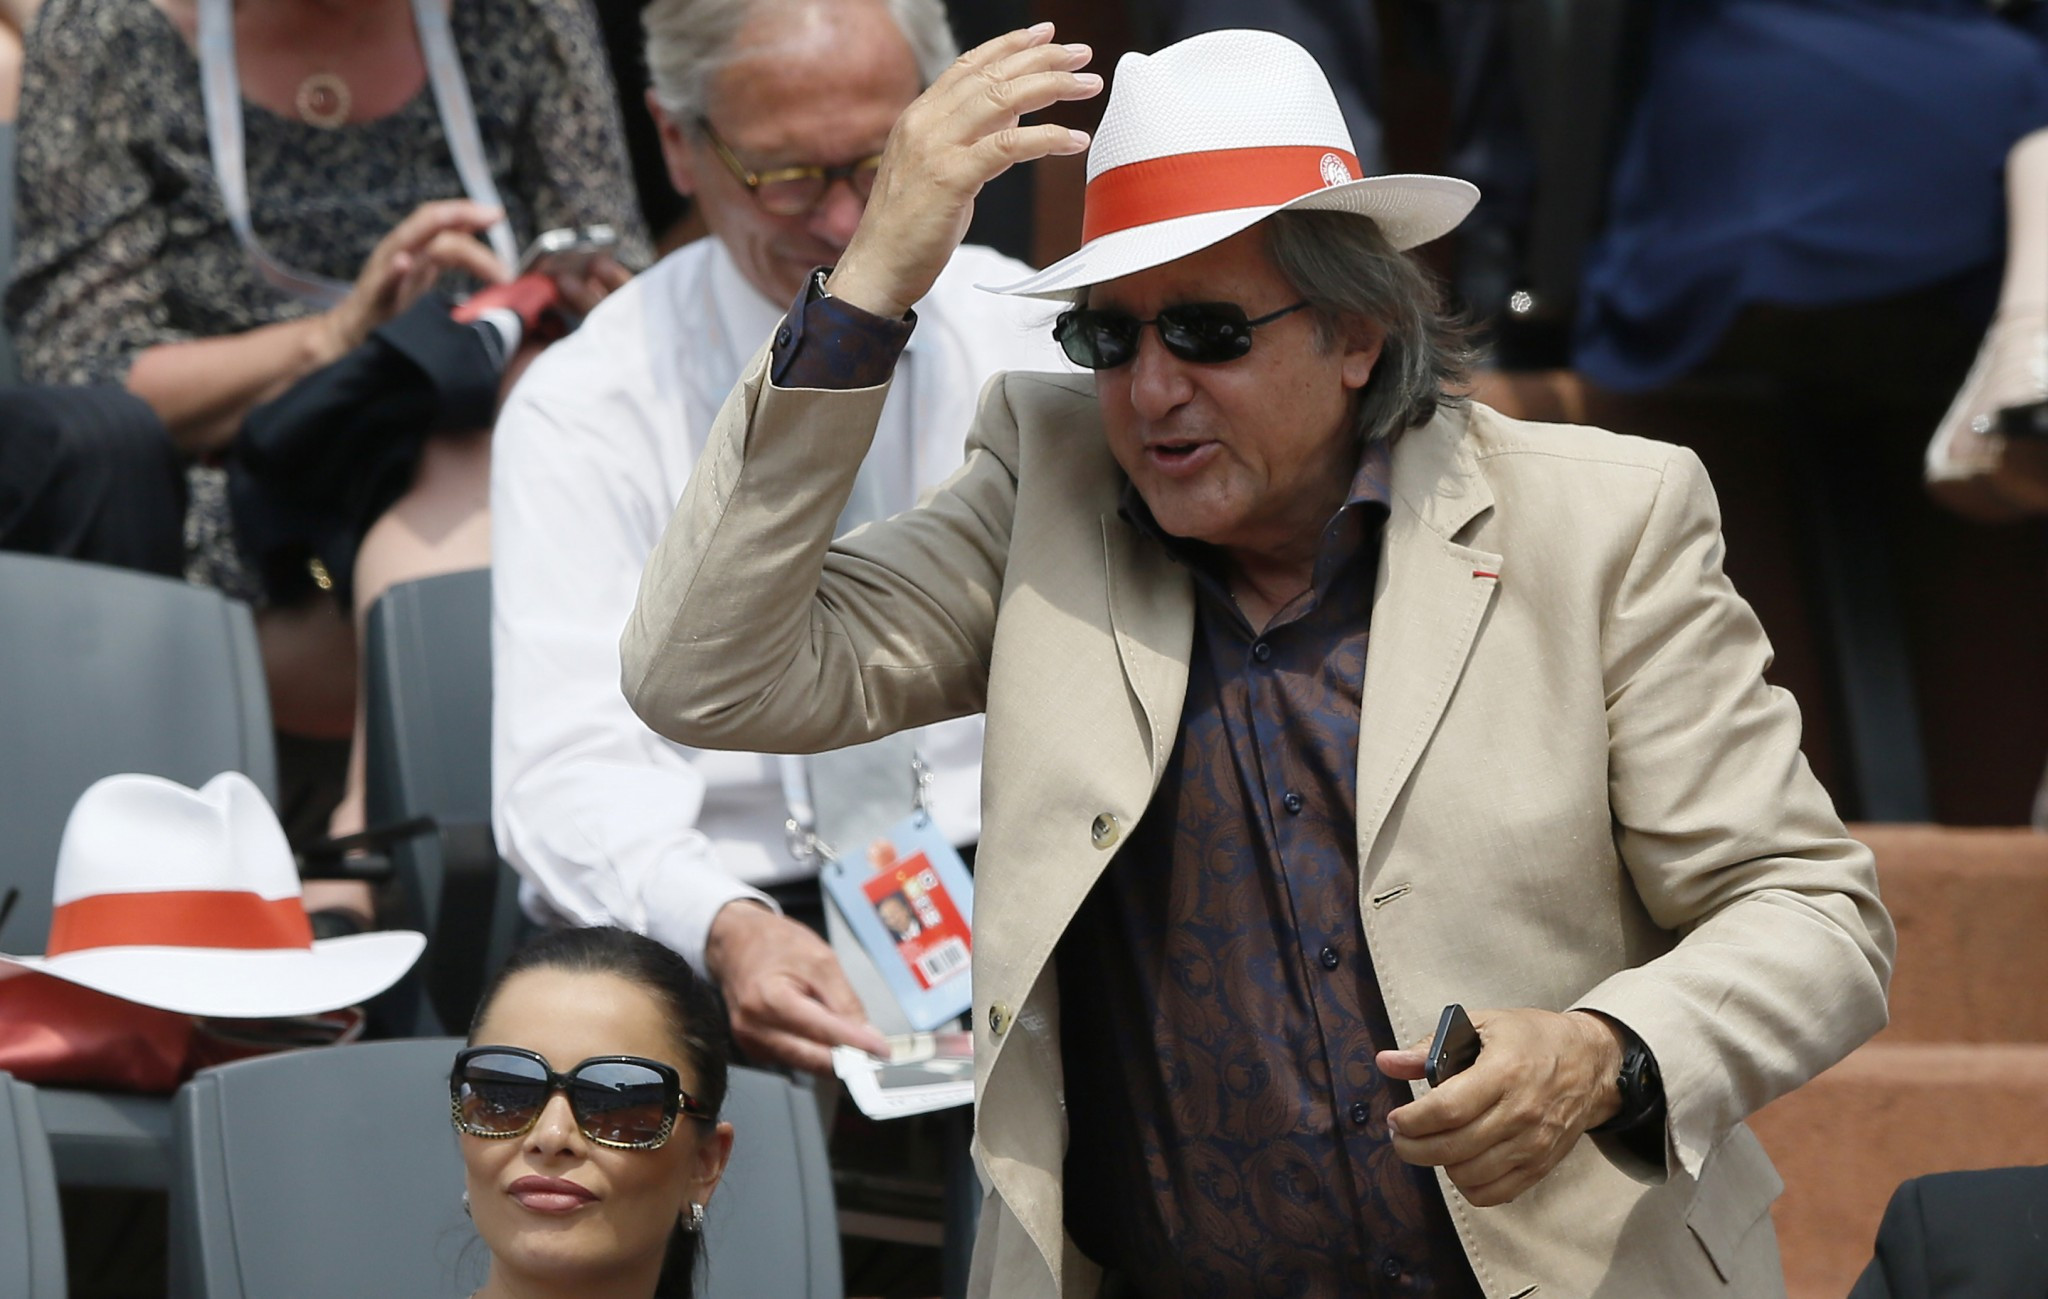 As things stand, Ilie Nastase is not allowed to hold an official role at any ITF competition until 2021 ©Getty Images